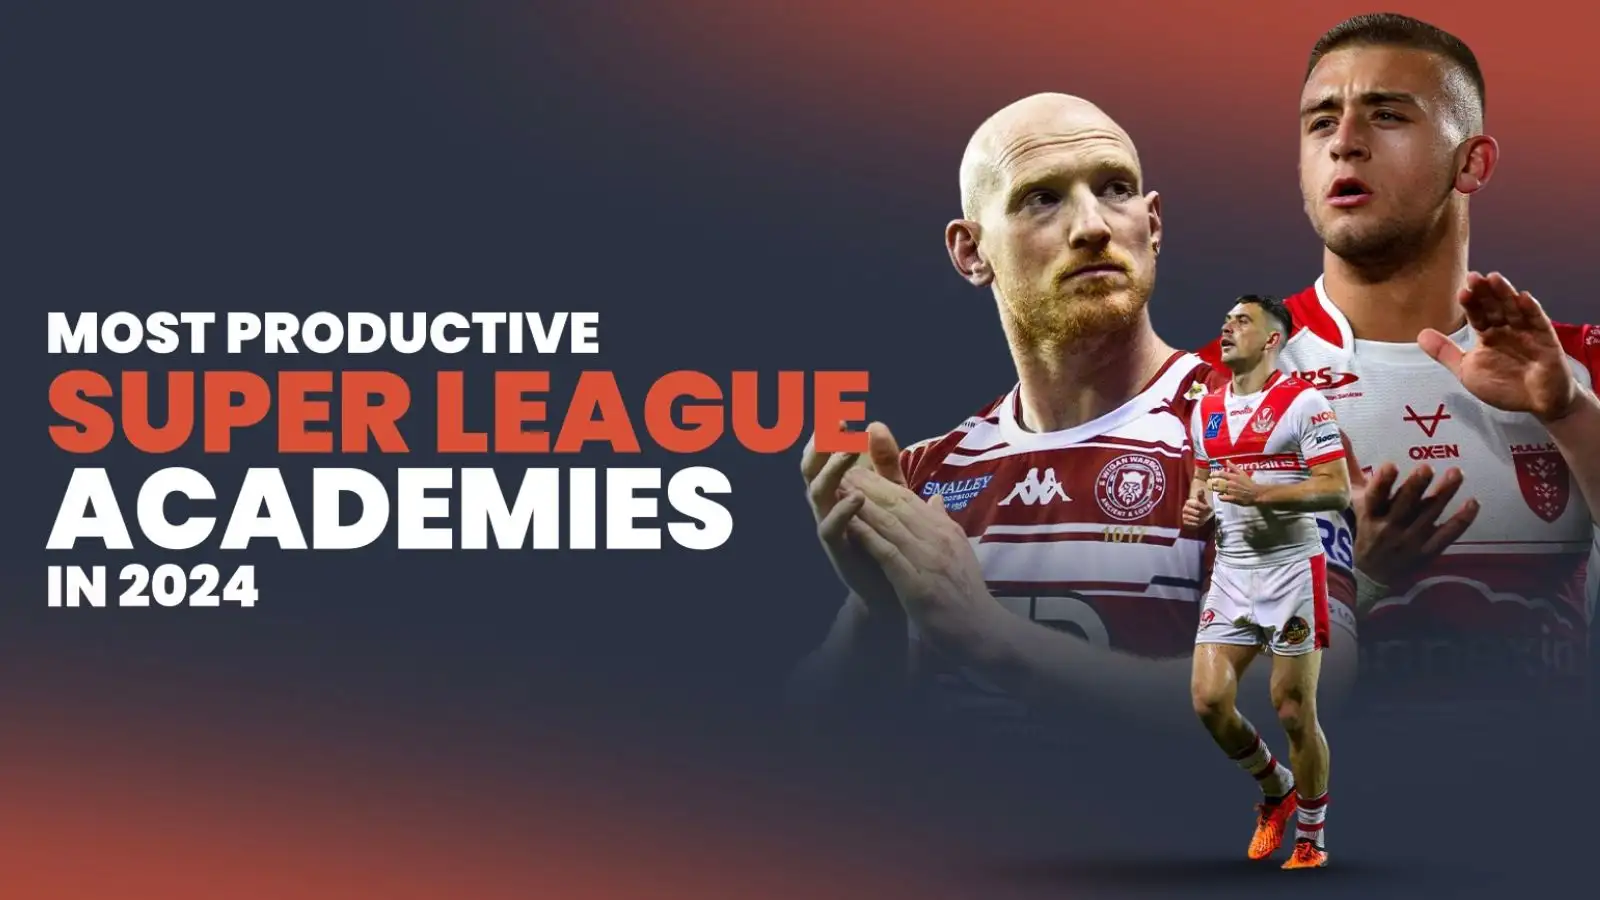 Ranked: The academies that have produced the most – and fewest – Super League players in 2024